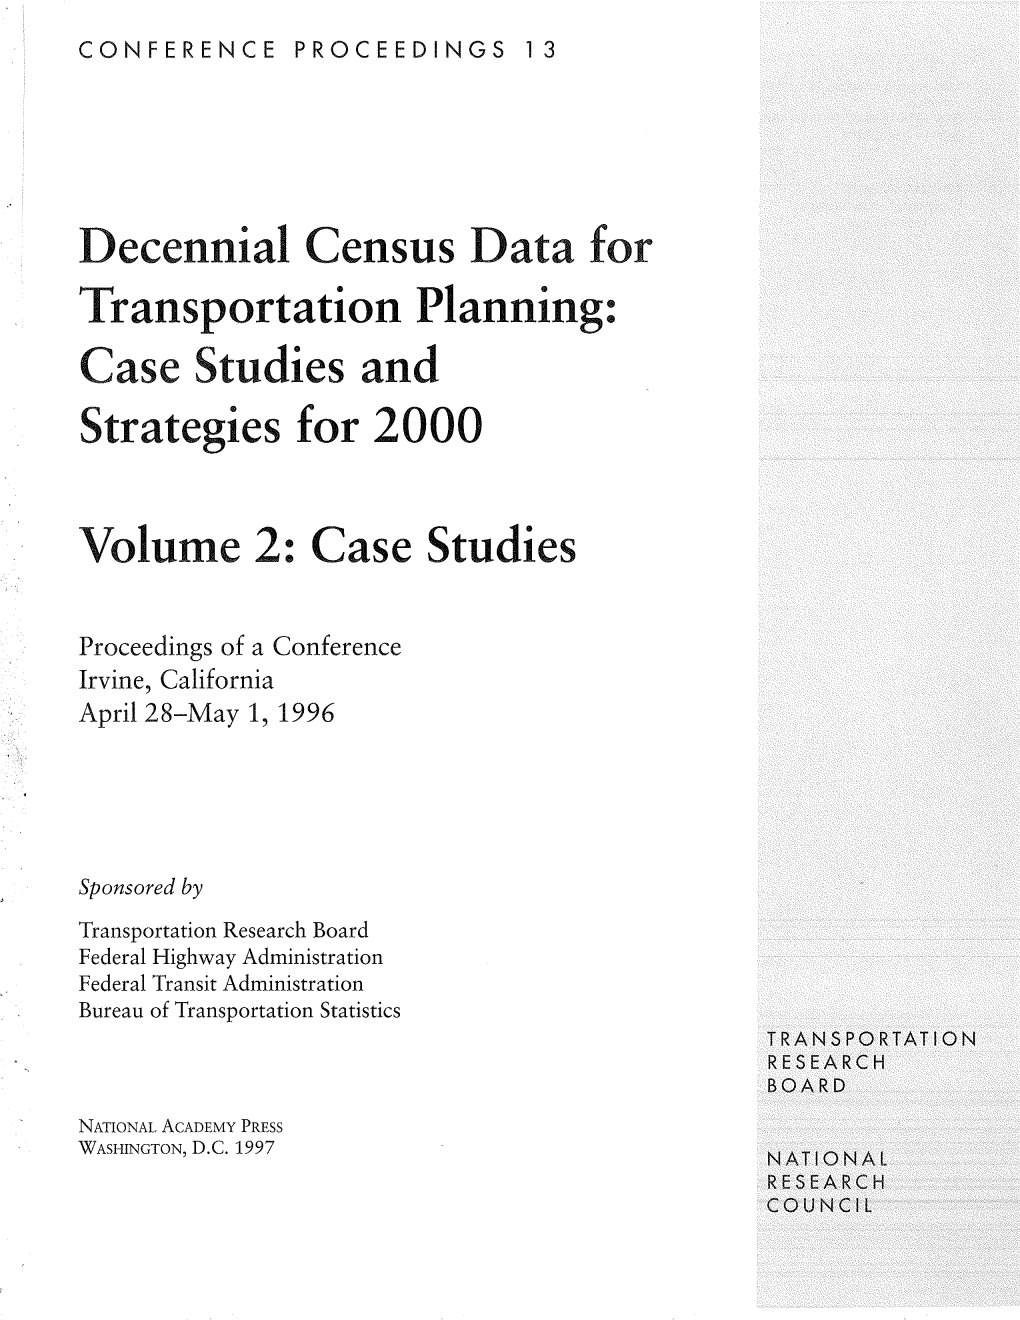 Decennial Census Data for Tansportation Planning: Case Studies and Strategies for 2000